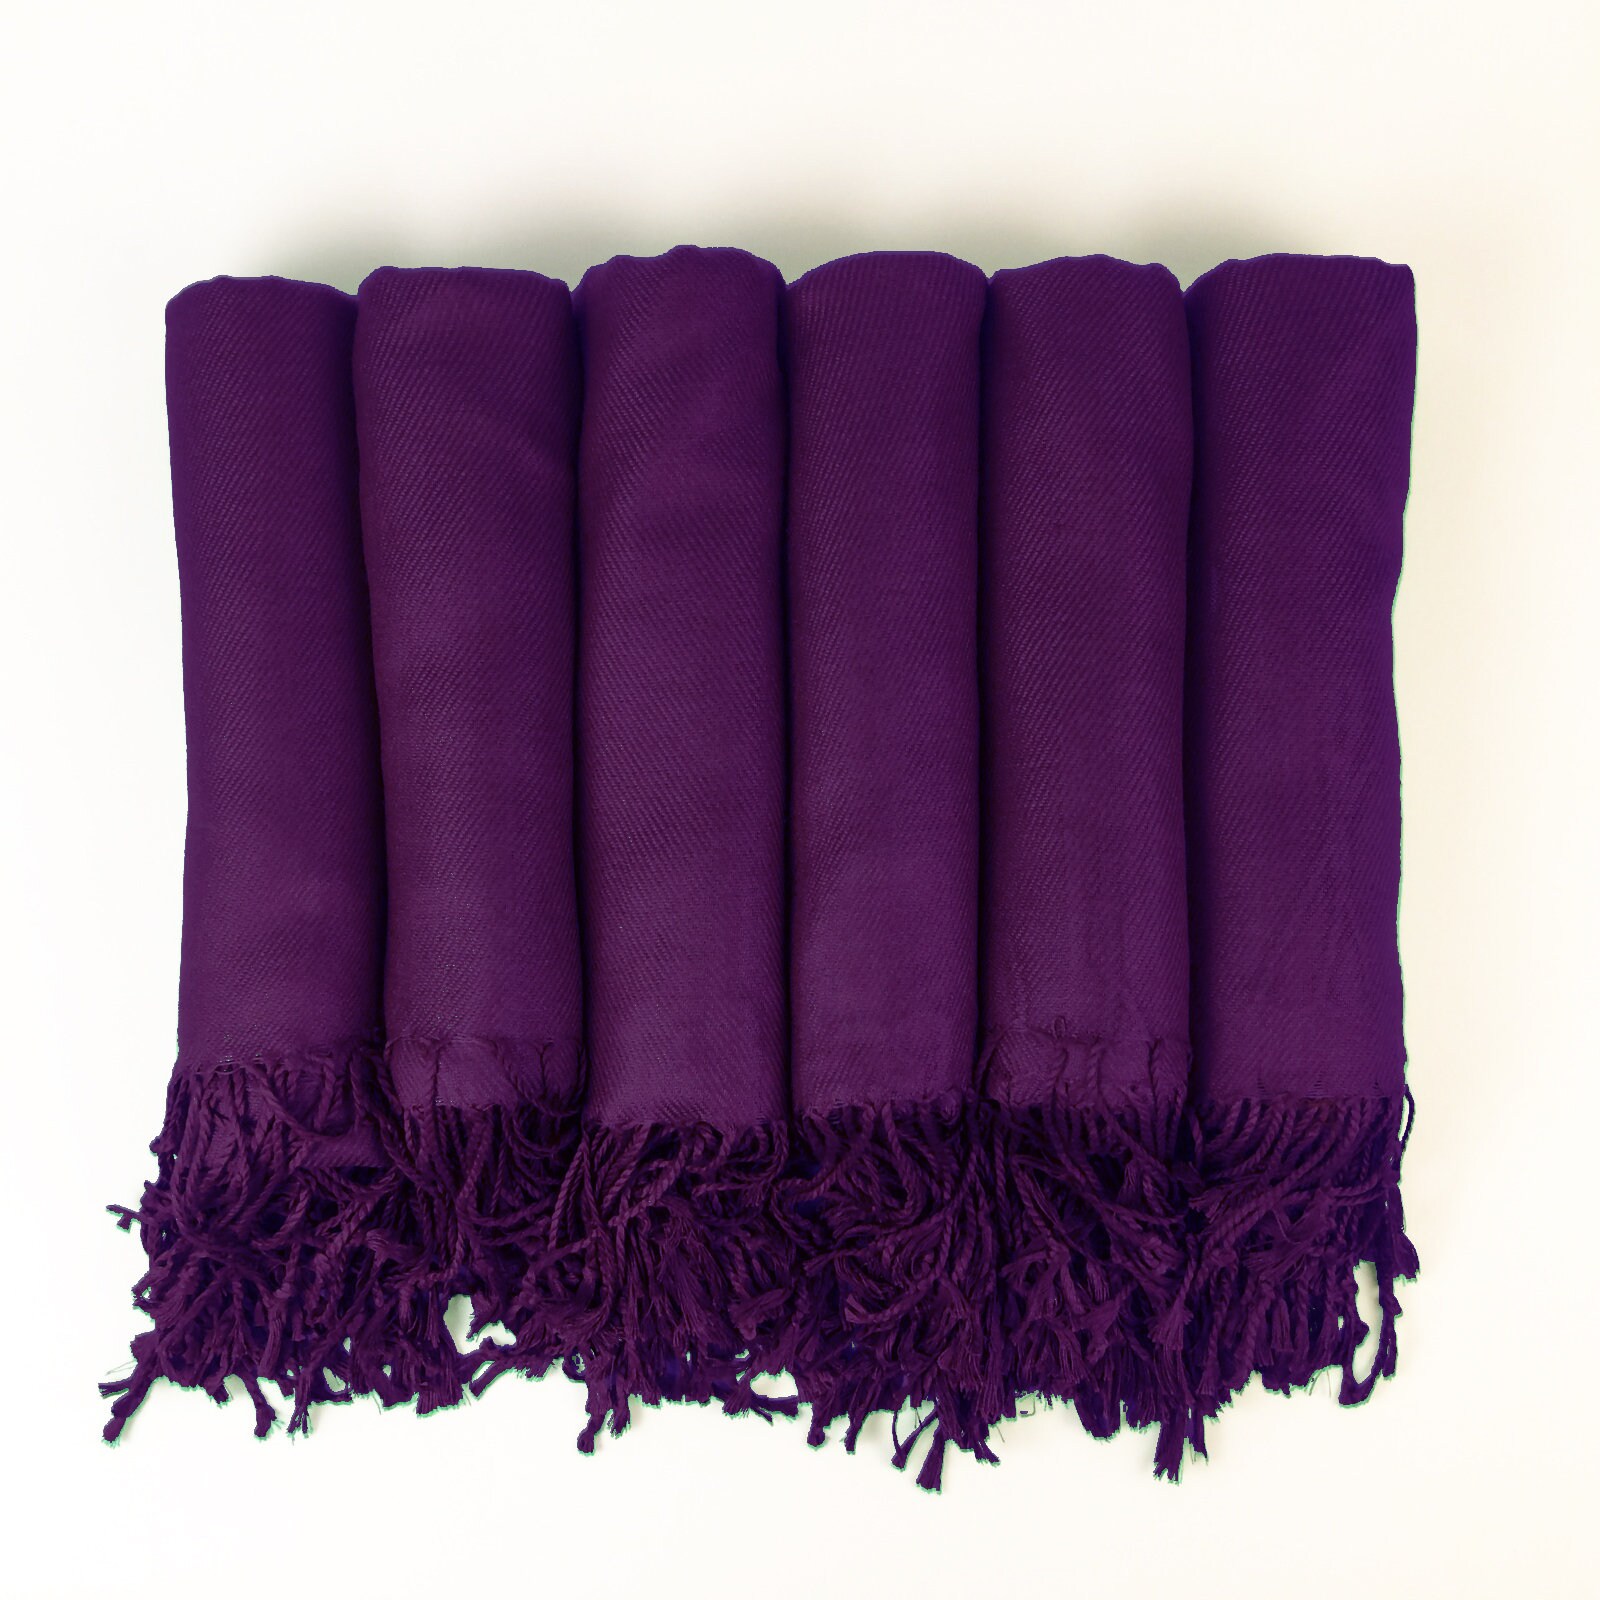 Set Of 2, 3, 4, 5, 6, 7, 8, 9 Or 10 Pashmina Shawls in Violet Purple - Bridesmaid Gift, Wedding Favor Monogrammable